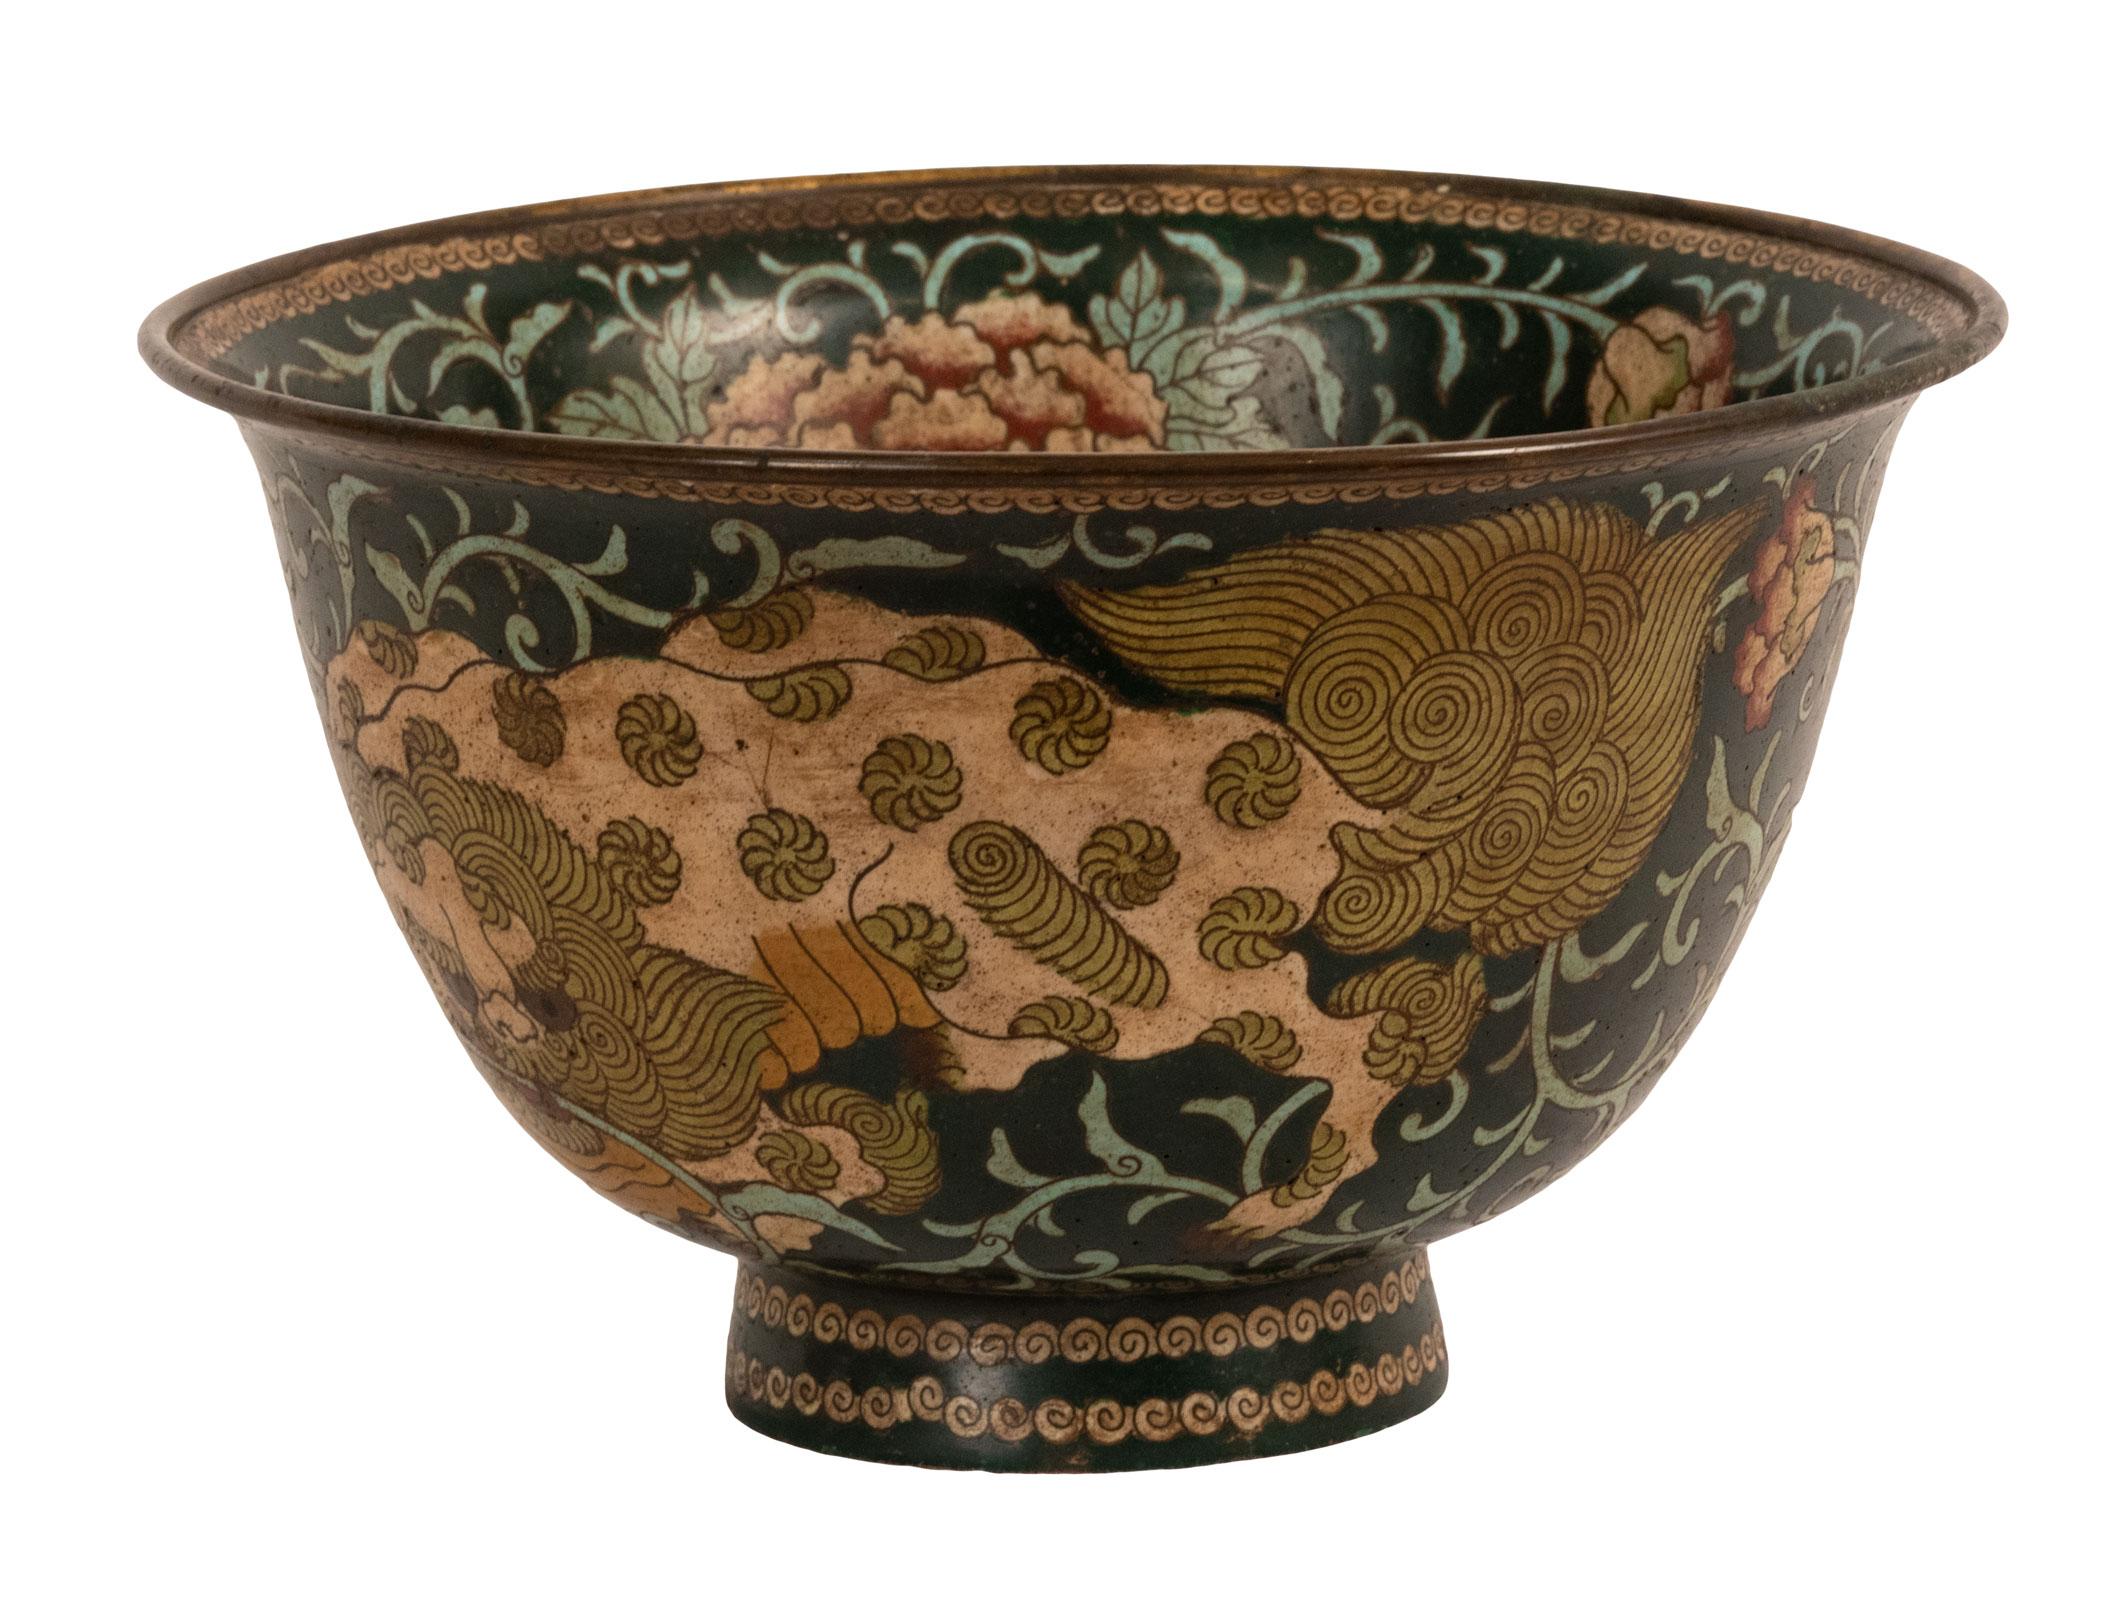 Large Japanese cloisonné (shippo, ???) Meiji bowl, circa 1870
A deep bowl with the interior featuring a Komainu ((??), lion-dog, holding a lotus flower in its mouth. The interior, exterior, and foot are decorated with lotus blooms, petals, vinery,